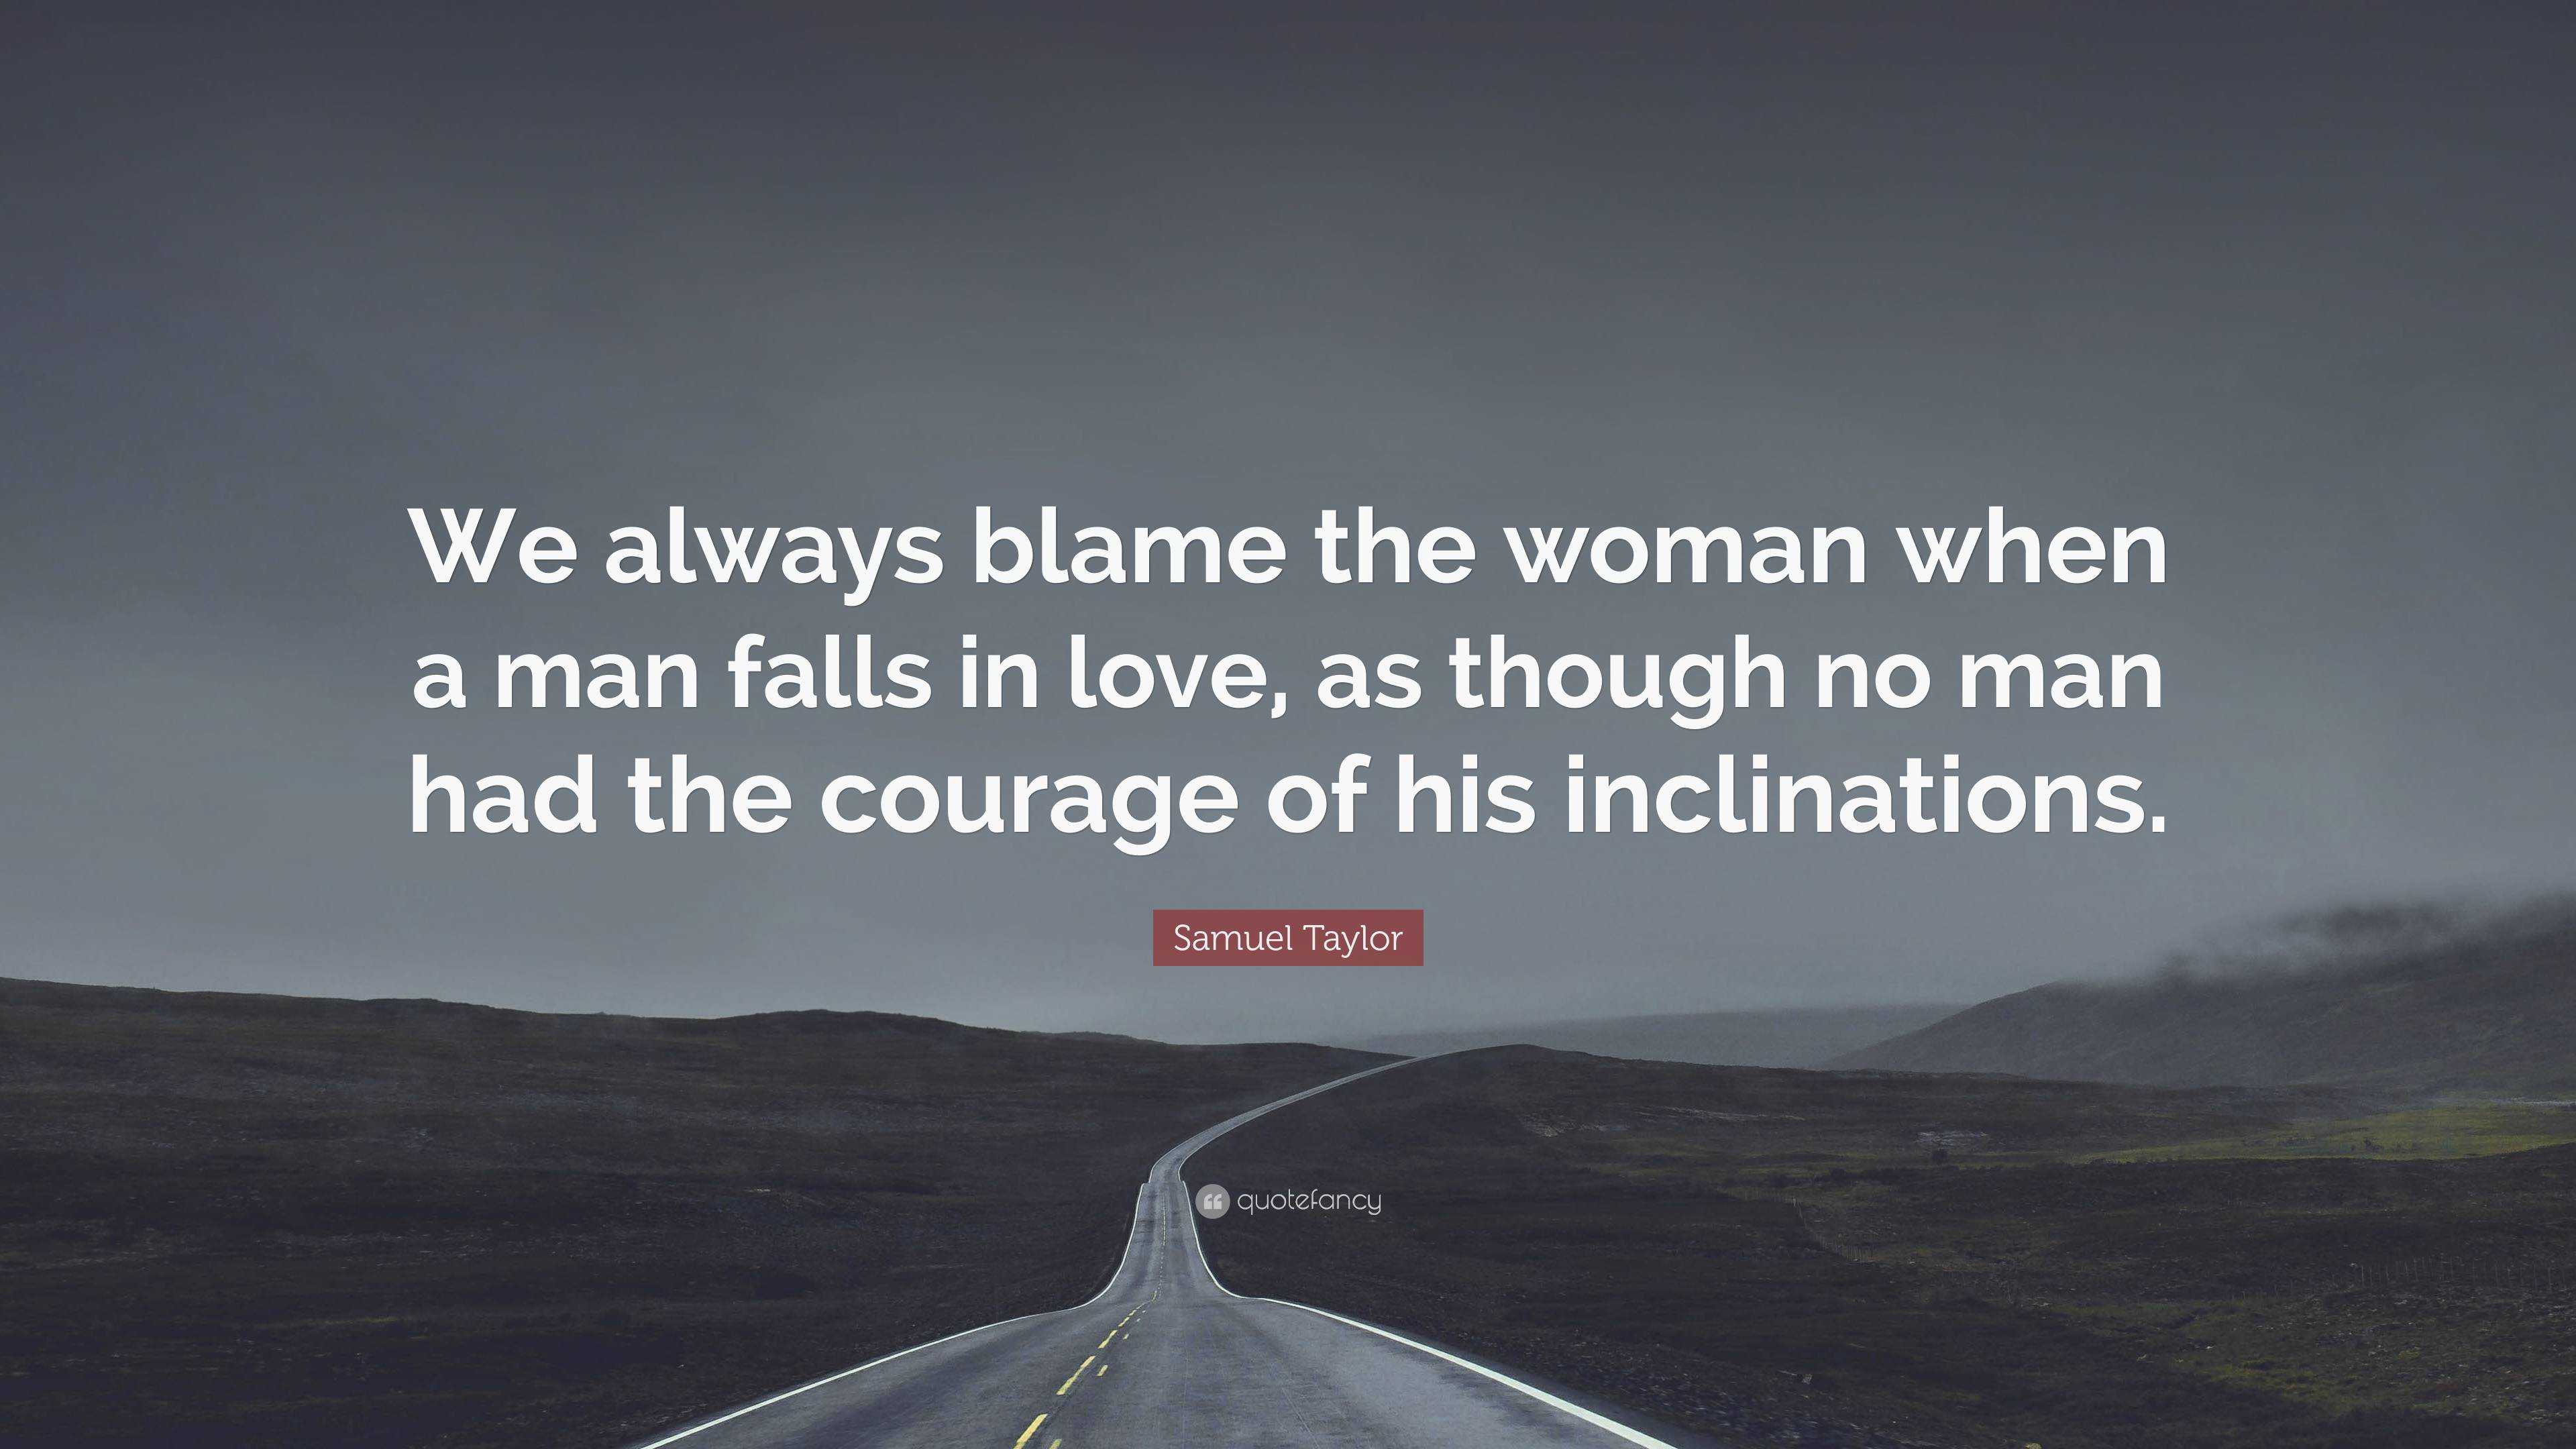 Samuel Taylor Quote: “We always blame the woman when a man falls in ...